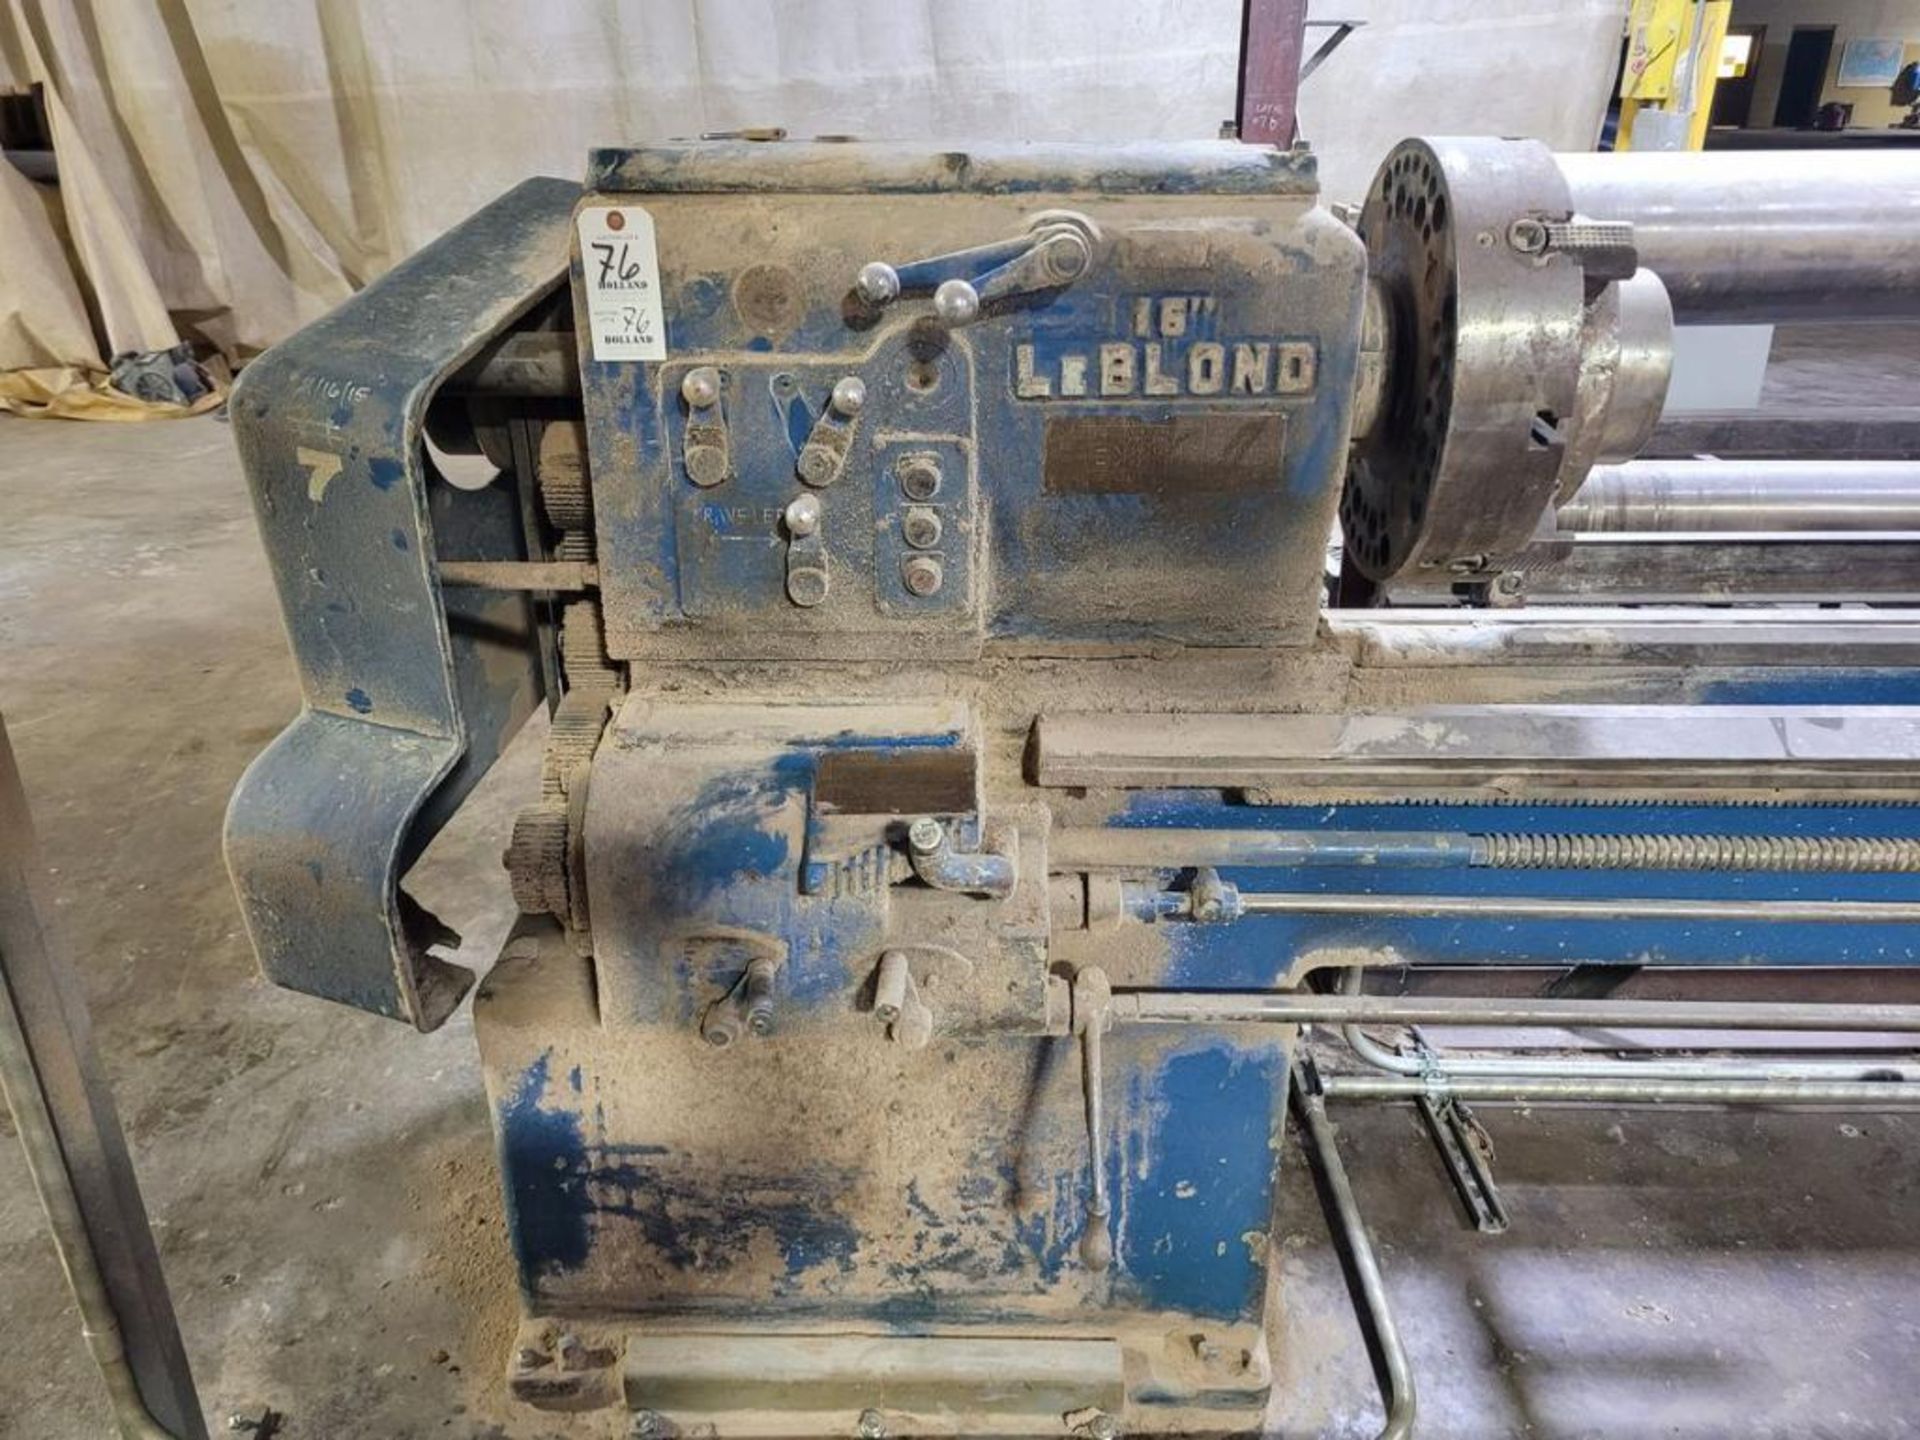 LeBlond Converted Rubber Belt Grinding Lathe: 15-1010 Spindle RPM, Approx. 16" Swing, Approx. 120" B - Image 2 of 6